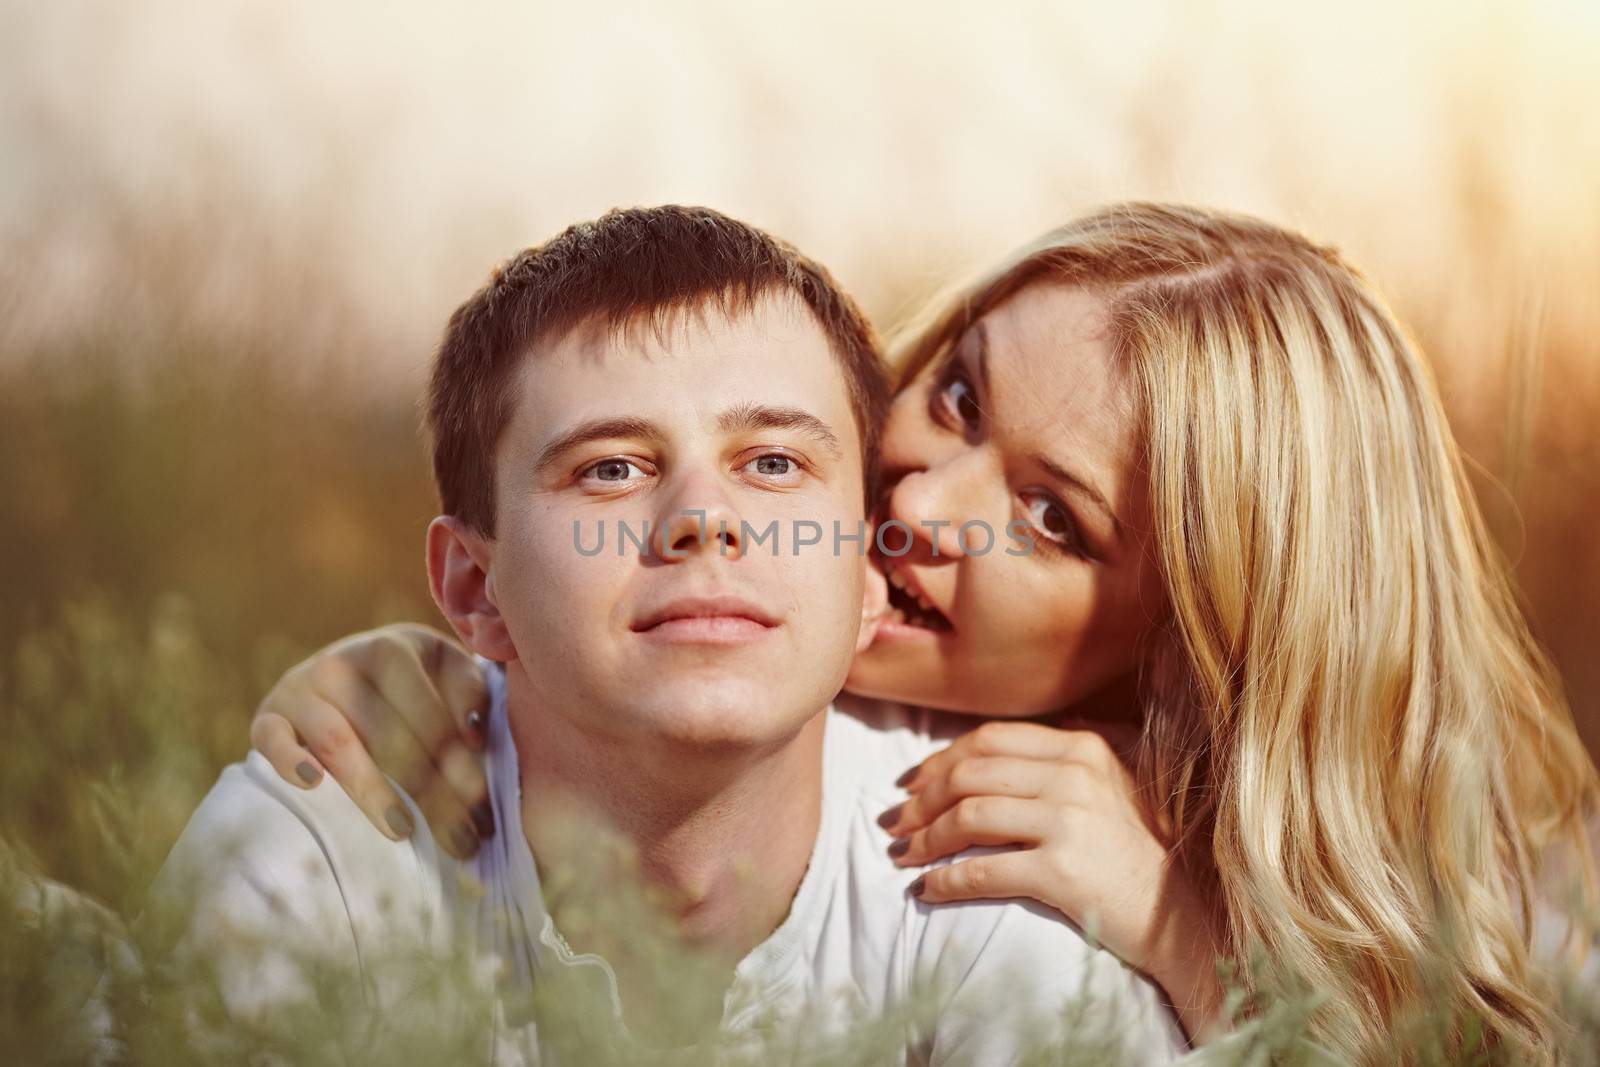 oung couple lying on the sunset background. Man bites woman's ear